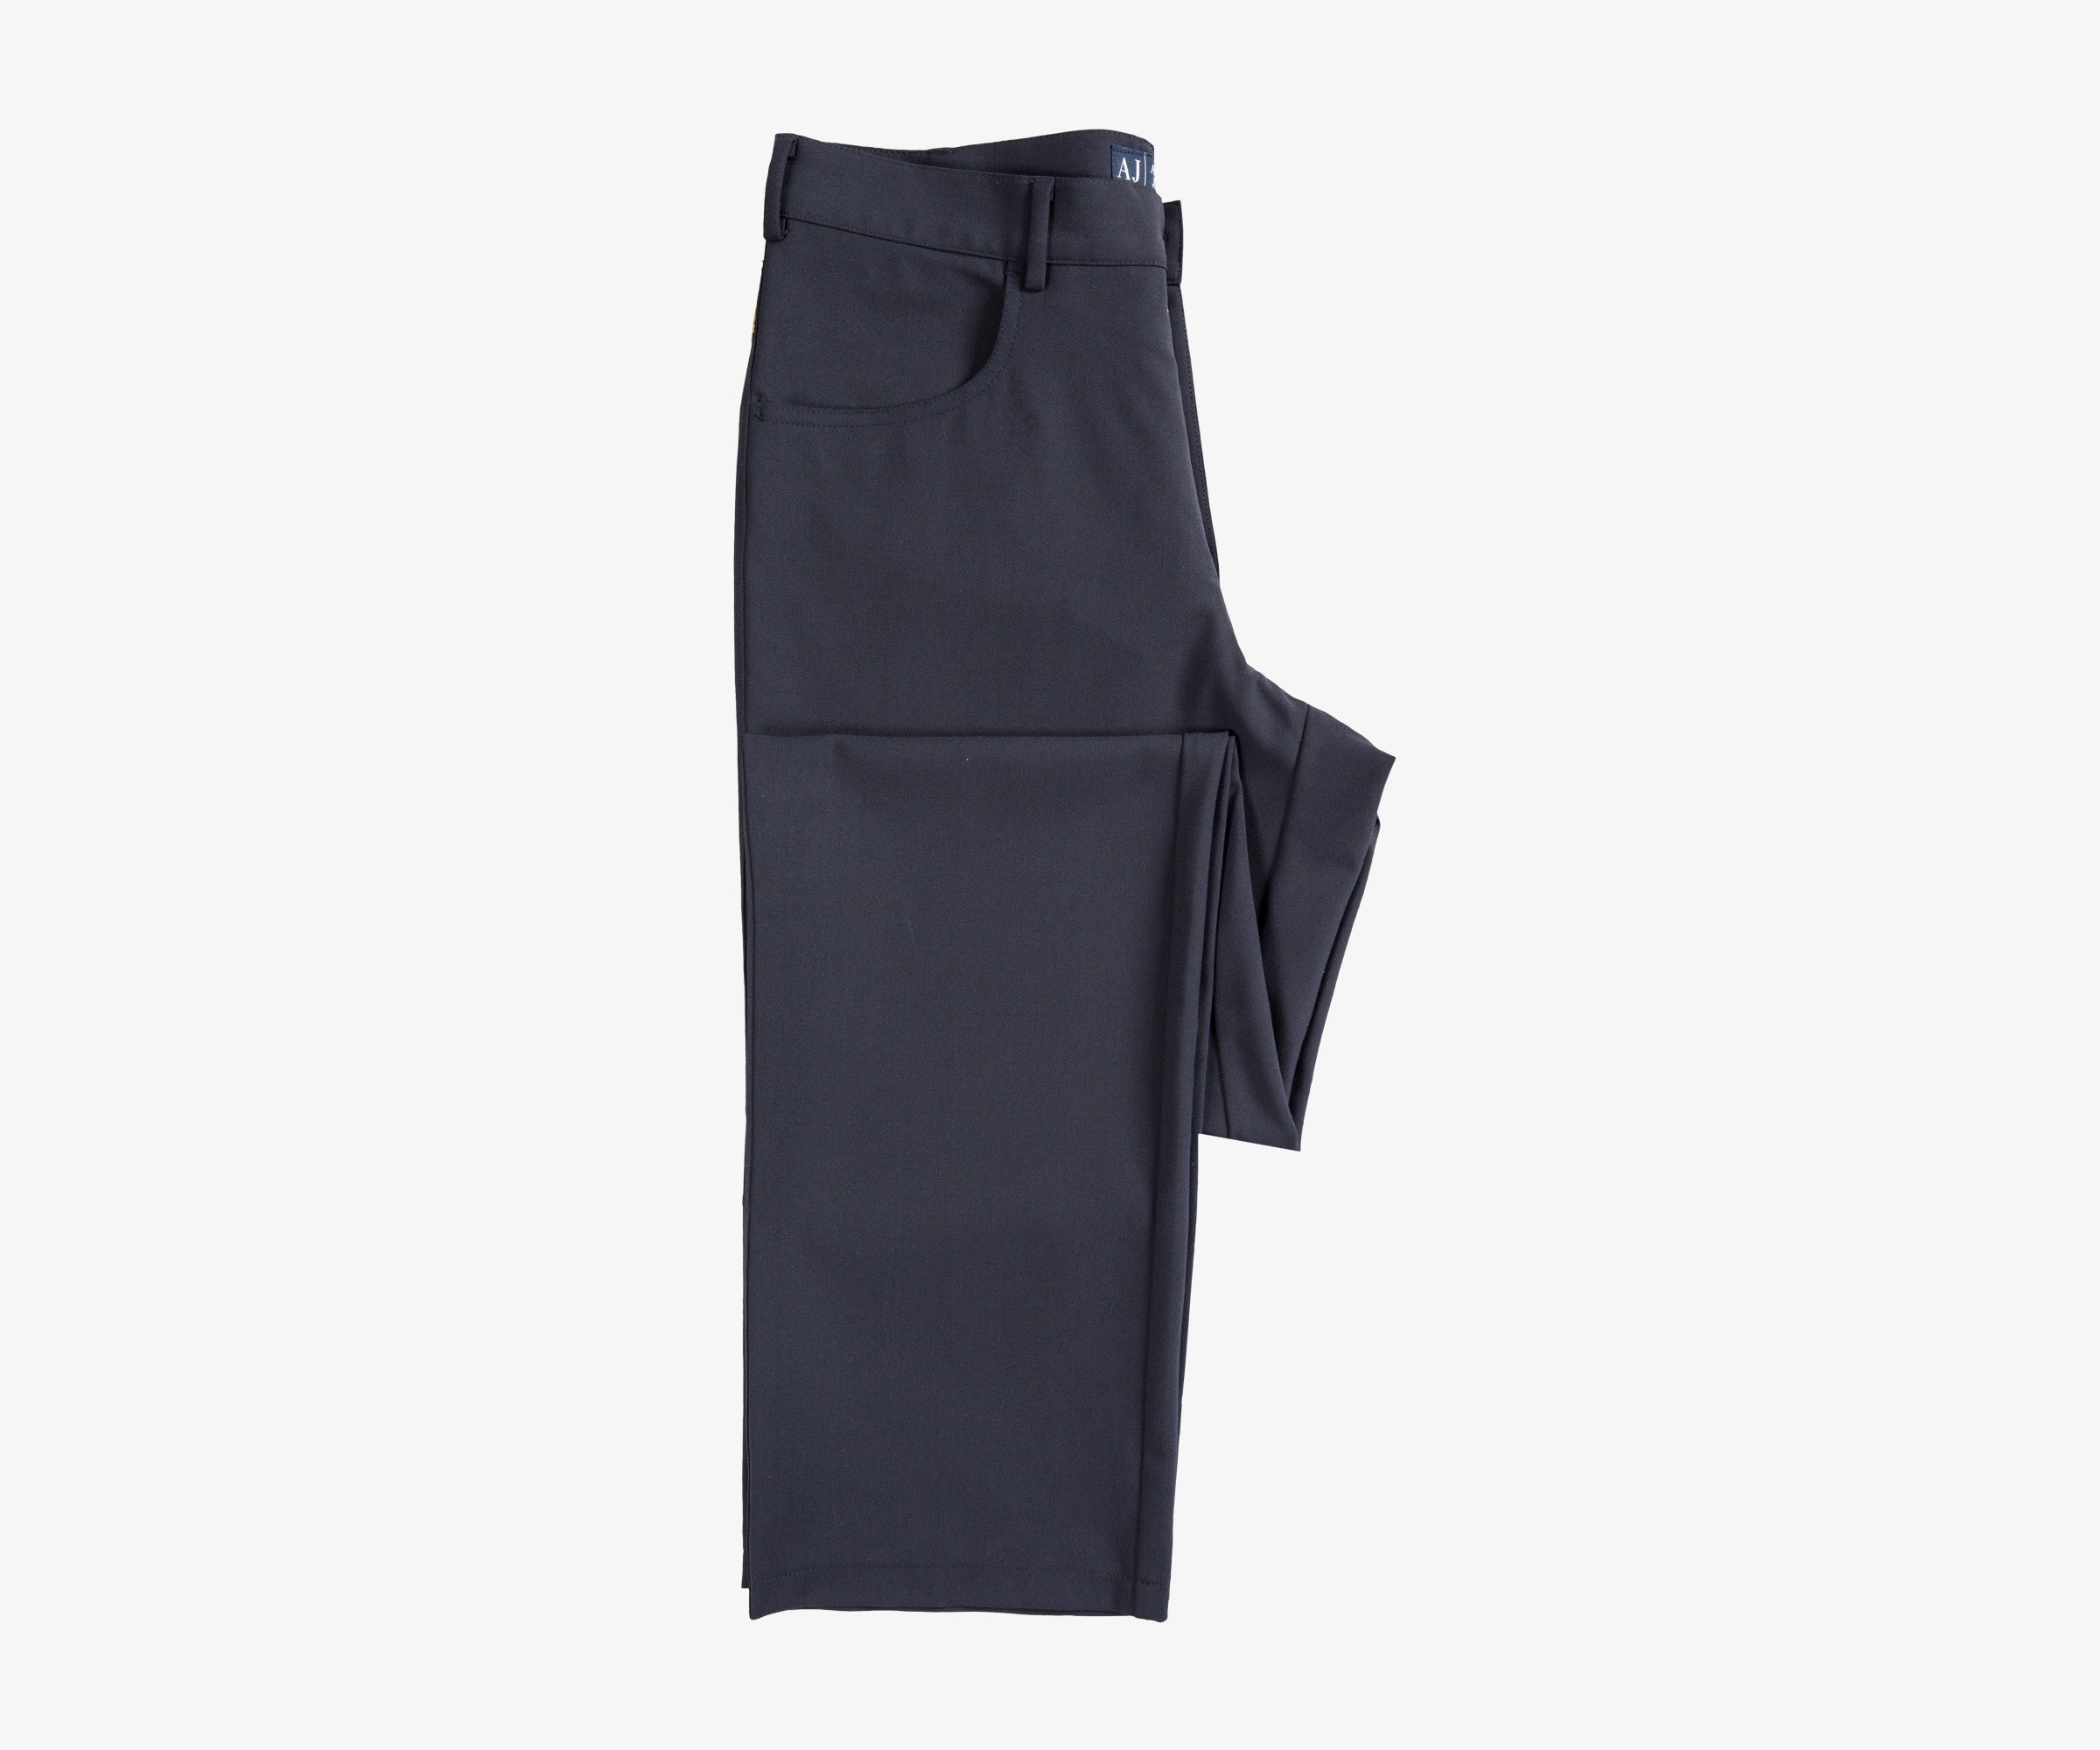 Adaptor Clothing  Together we standin Adaptor Frogmouth trousers   Available in 5 colours Waists 30 to 40 in Short Regular and  Longs in sizes 34  36 trousers menstrousers slimtrousers  greentrousers 